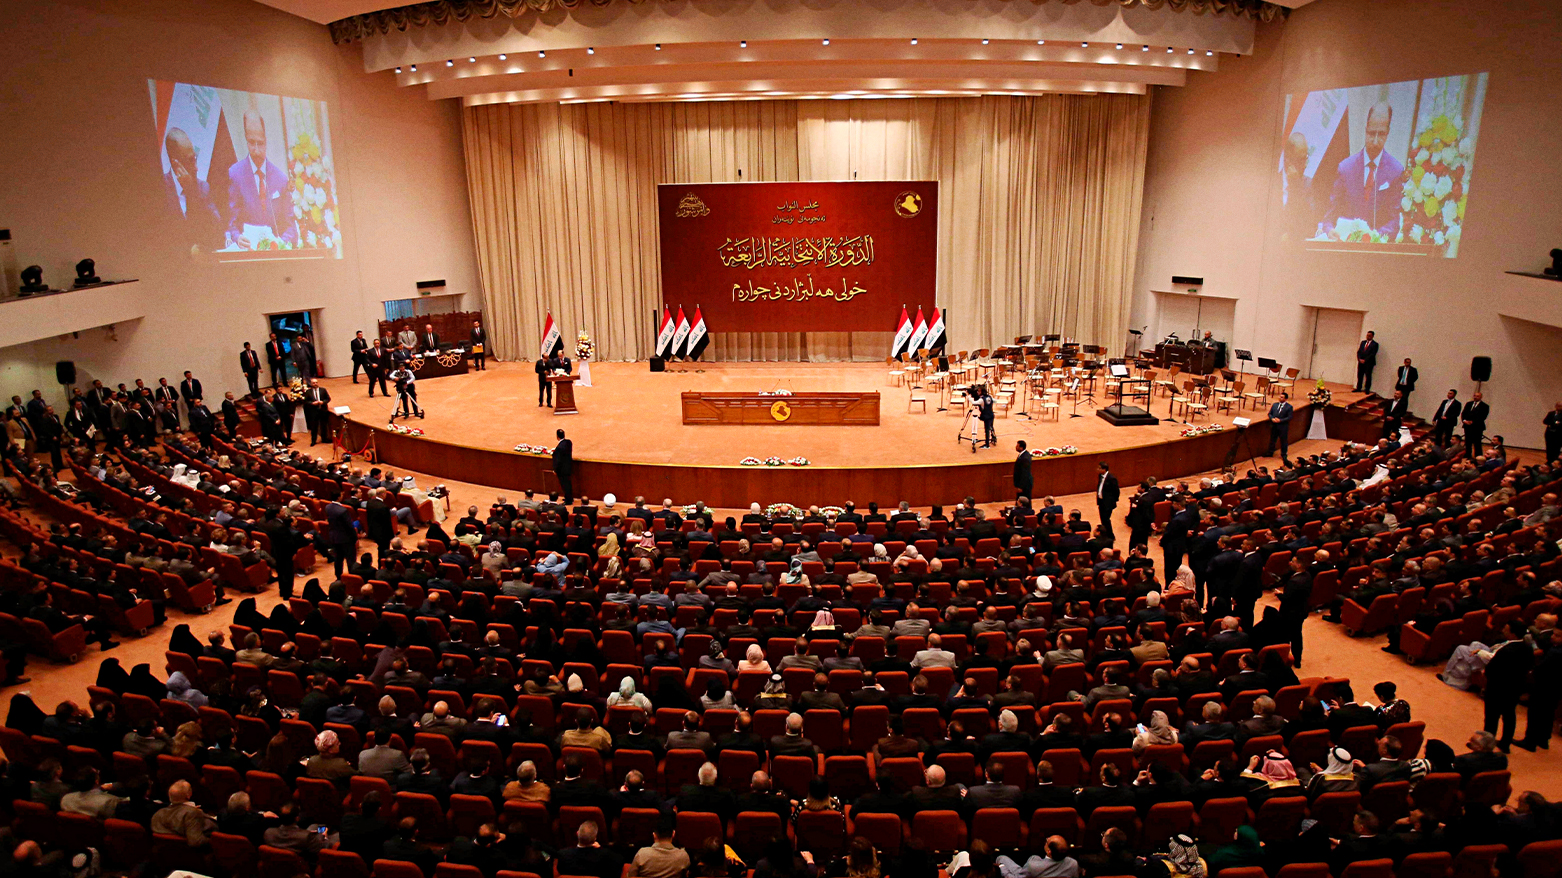 Chaos in Iraqi parliament attempt to impose dictatorship political analyst